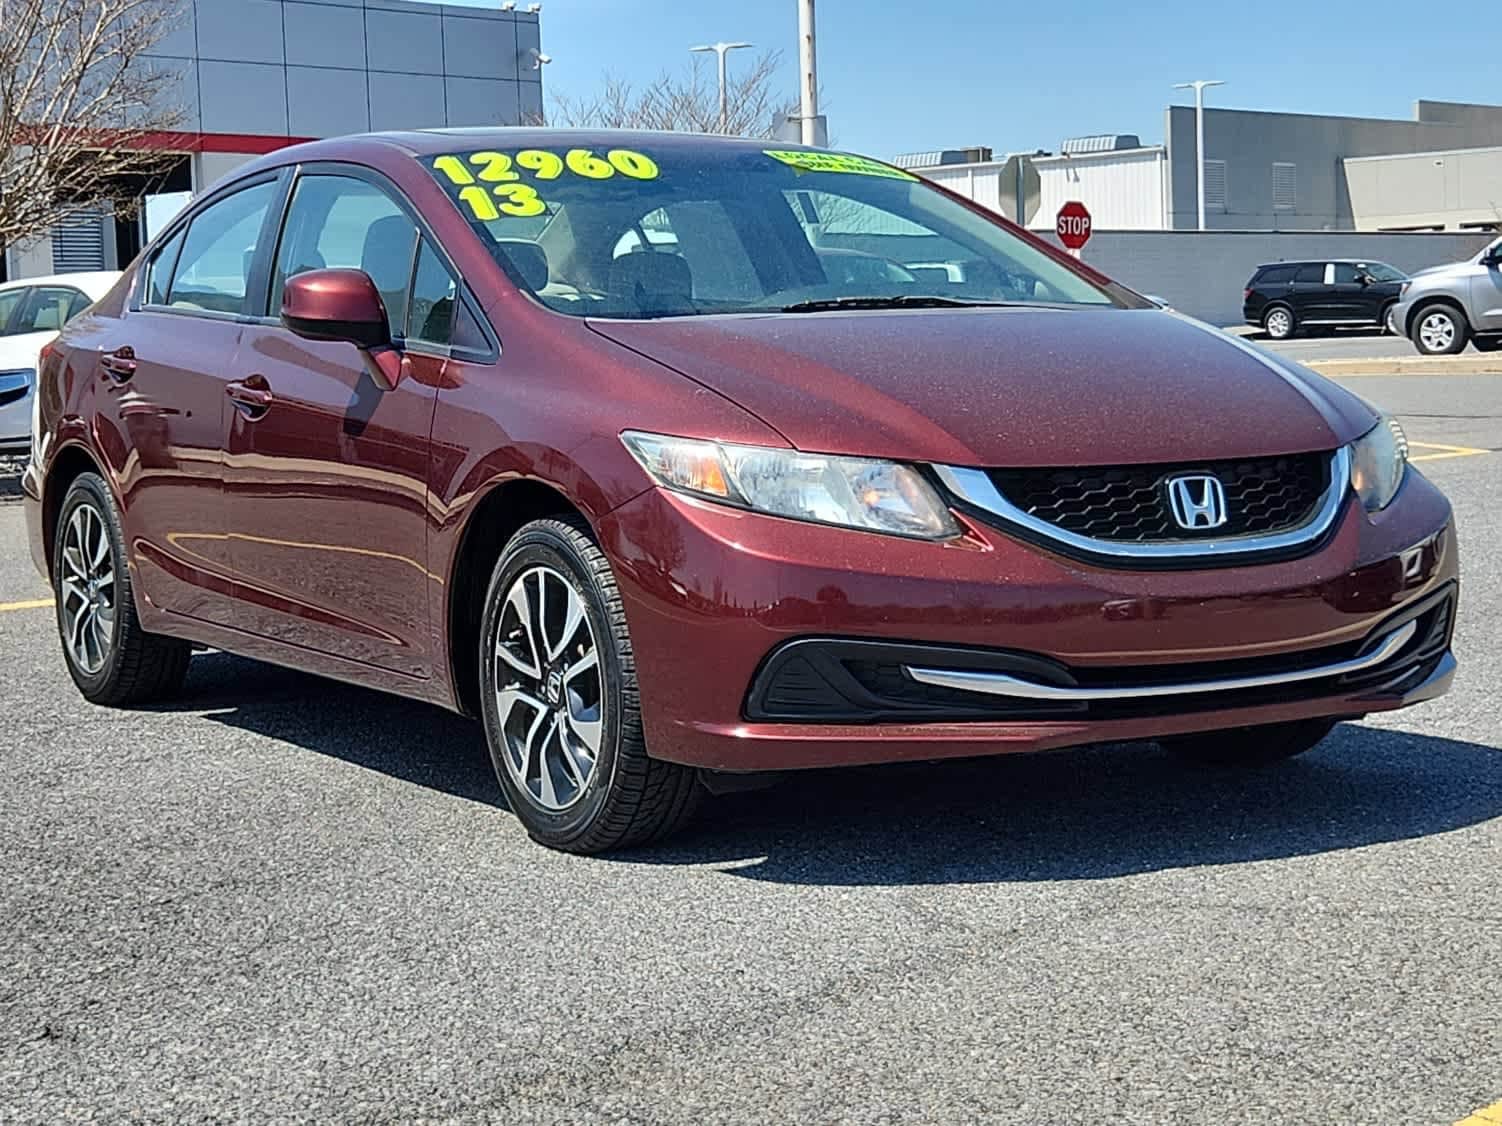 Used 2013 Honda Civic EX with VIN 19XFB2F80DE092284 for sale in Milford, DE